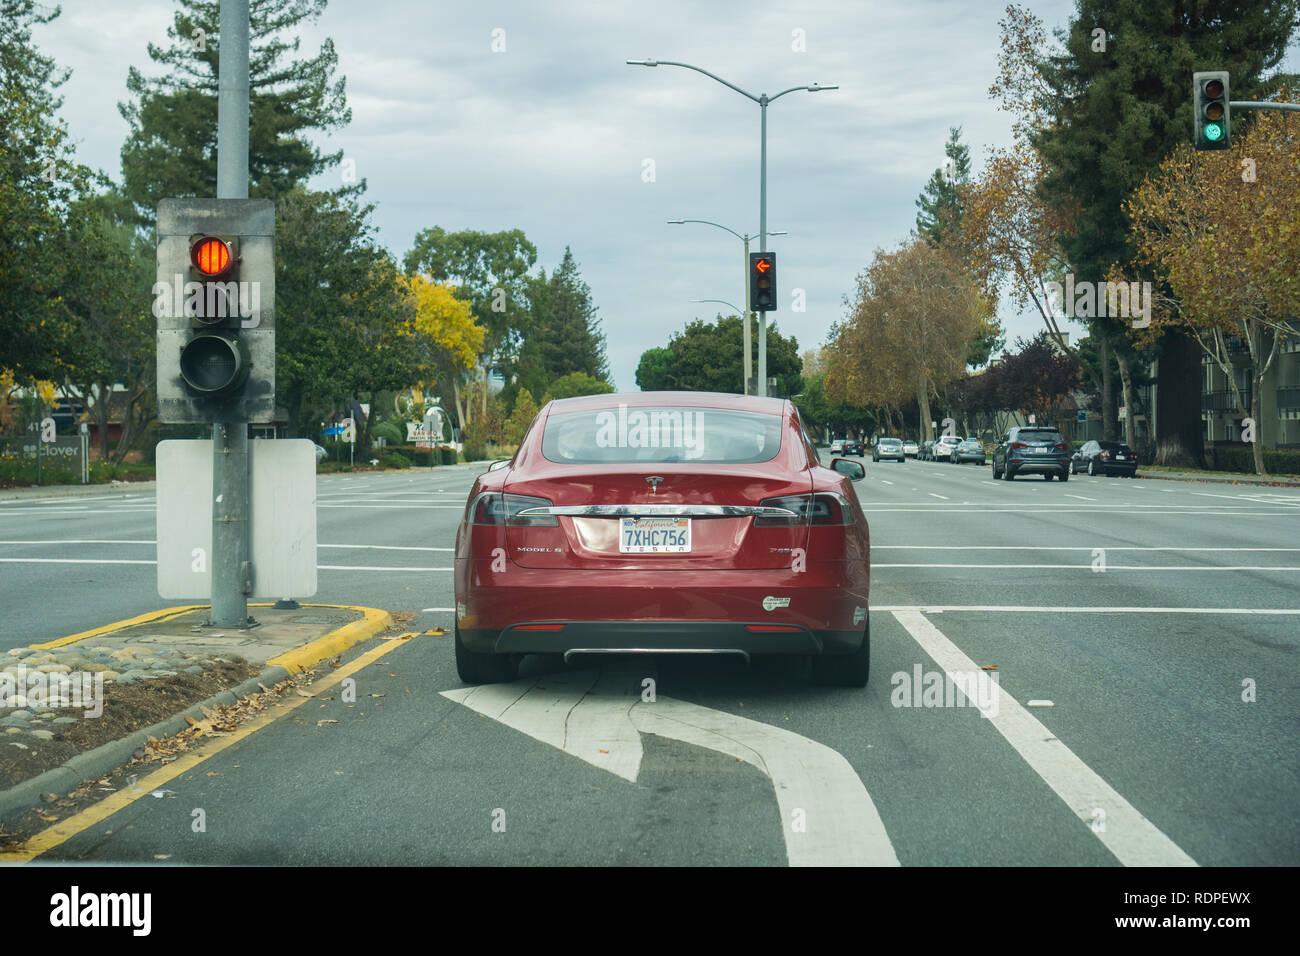 November 23, 2017 Sunnyvale/CA/USA - Tesla Model S P85D stopped at a traffic light on a cloudy day Stock Photo